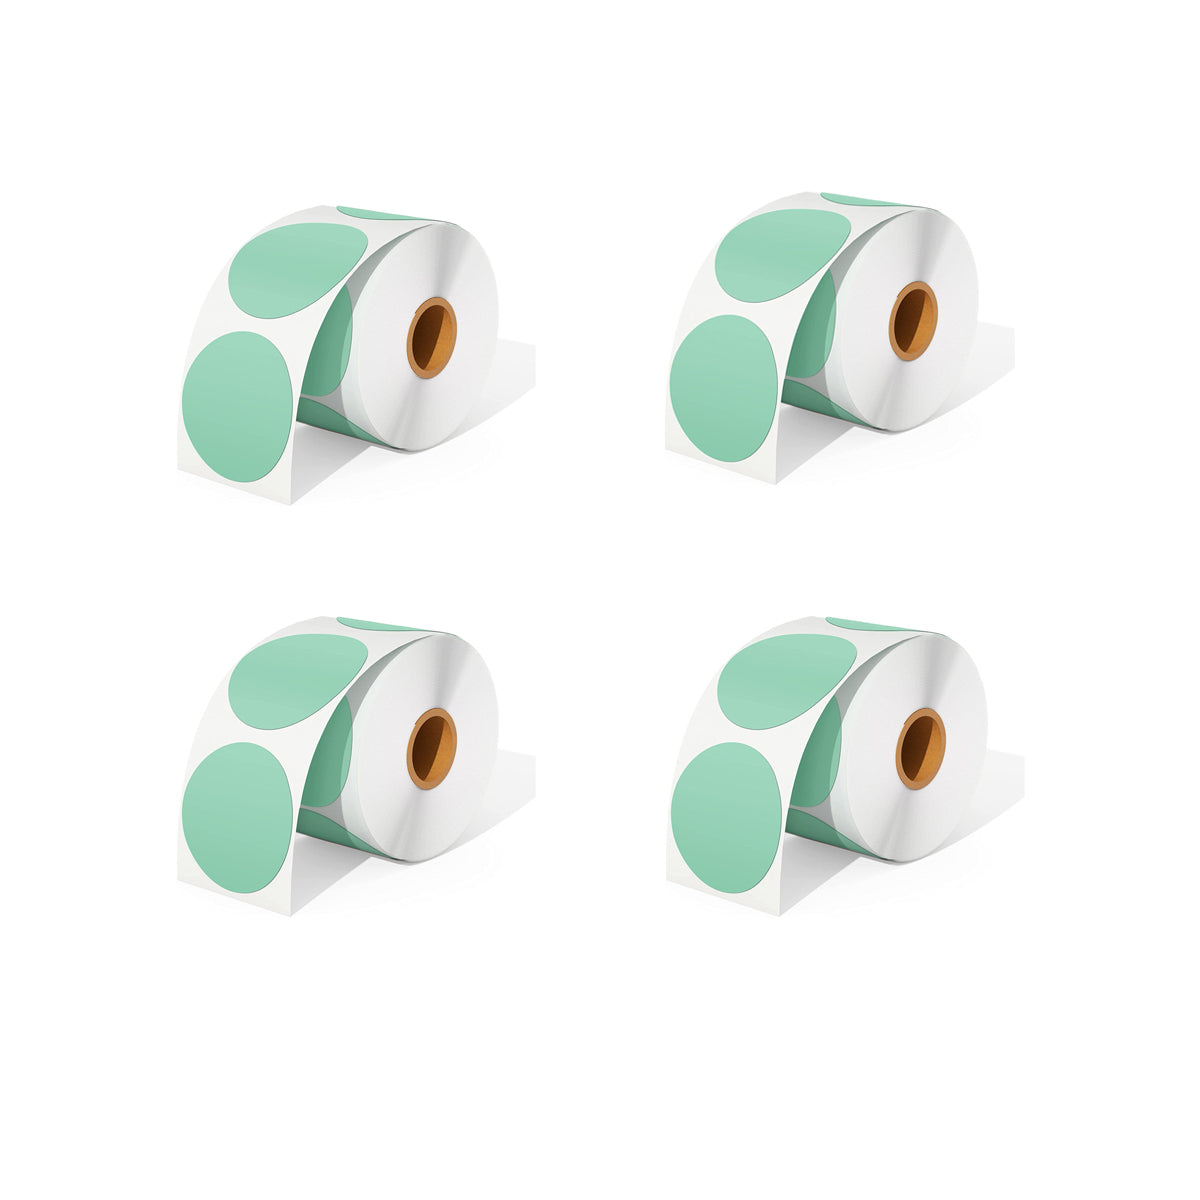 We offer four rolls of green direct thermal round labels as a kit, with 750 labels per roll.